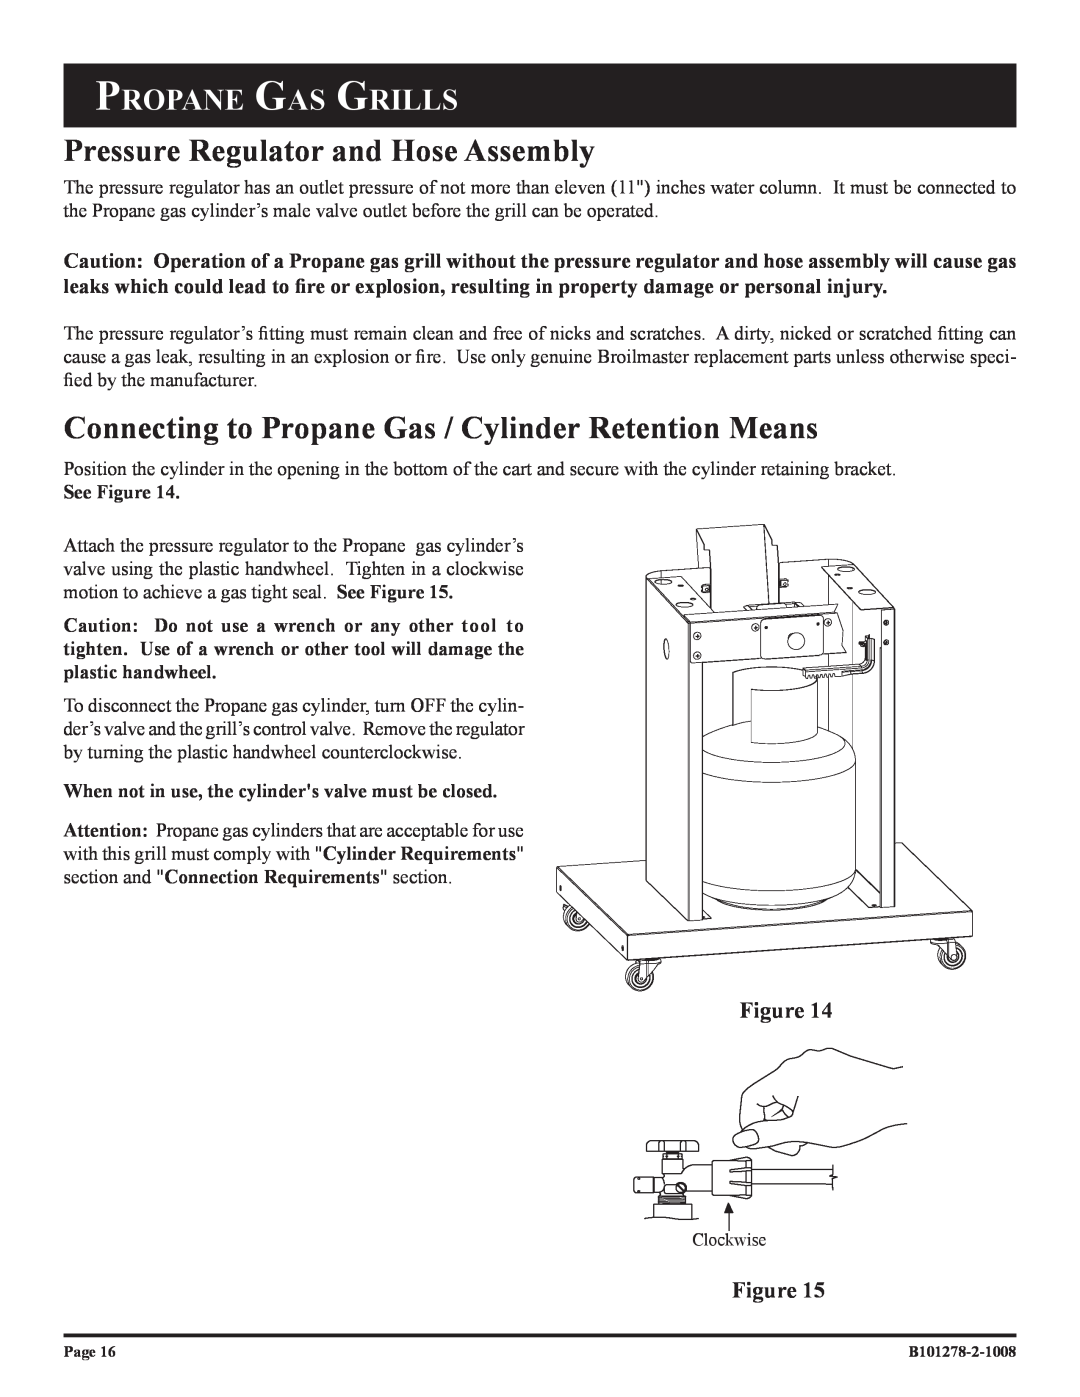 Broilmaster R3N-1 Pressure Regulator and Hose Assembly, Connecting to Propane Gas / Cylinder Retention Means, See Figure 